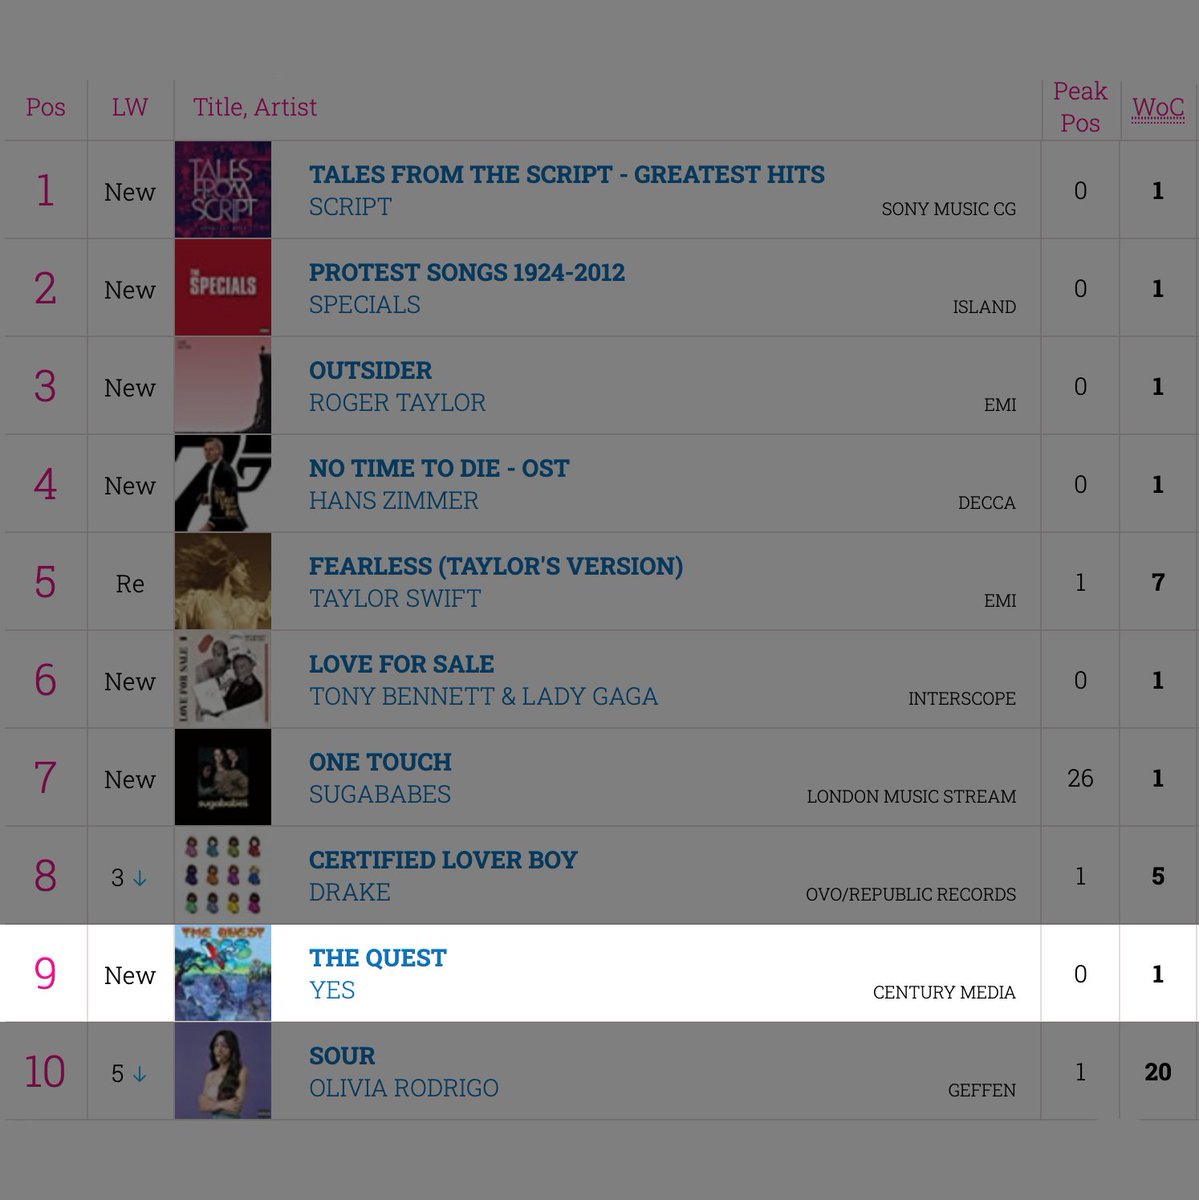 A huge thank you to YESfans everywhere for getting The Quest to Number 9 in the Official Albums Chart Top 100!